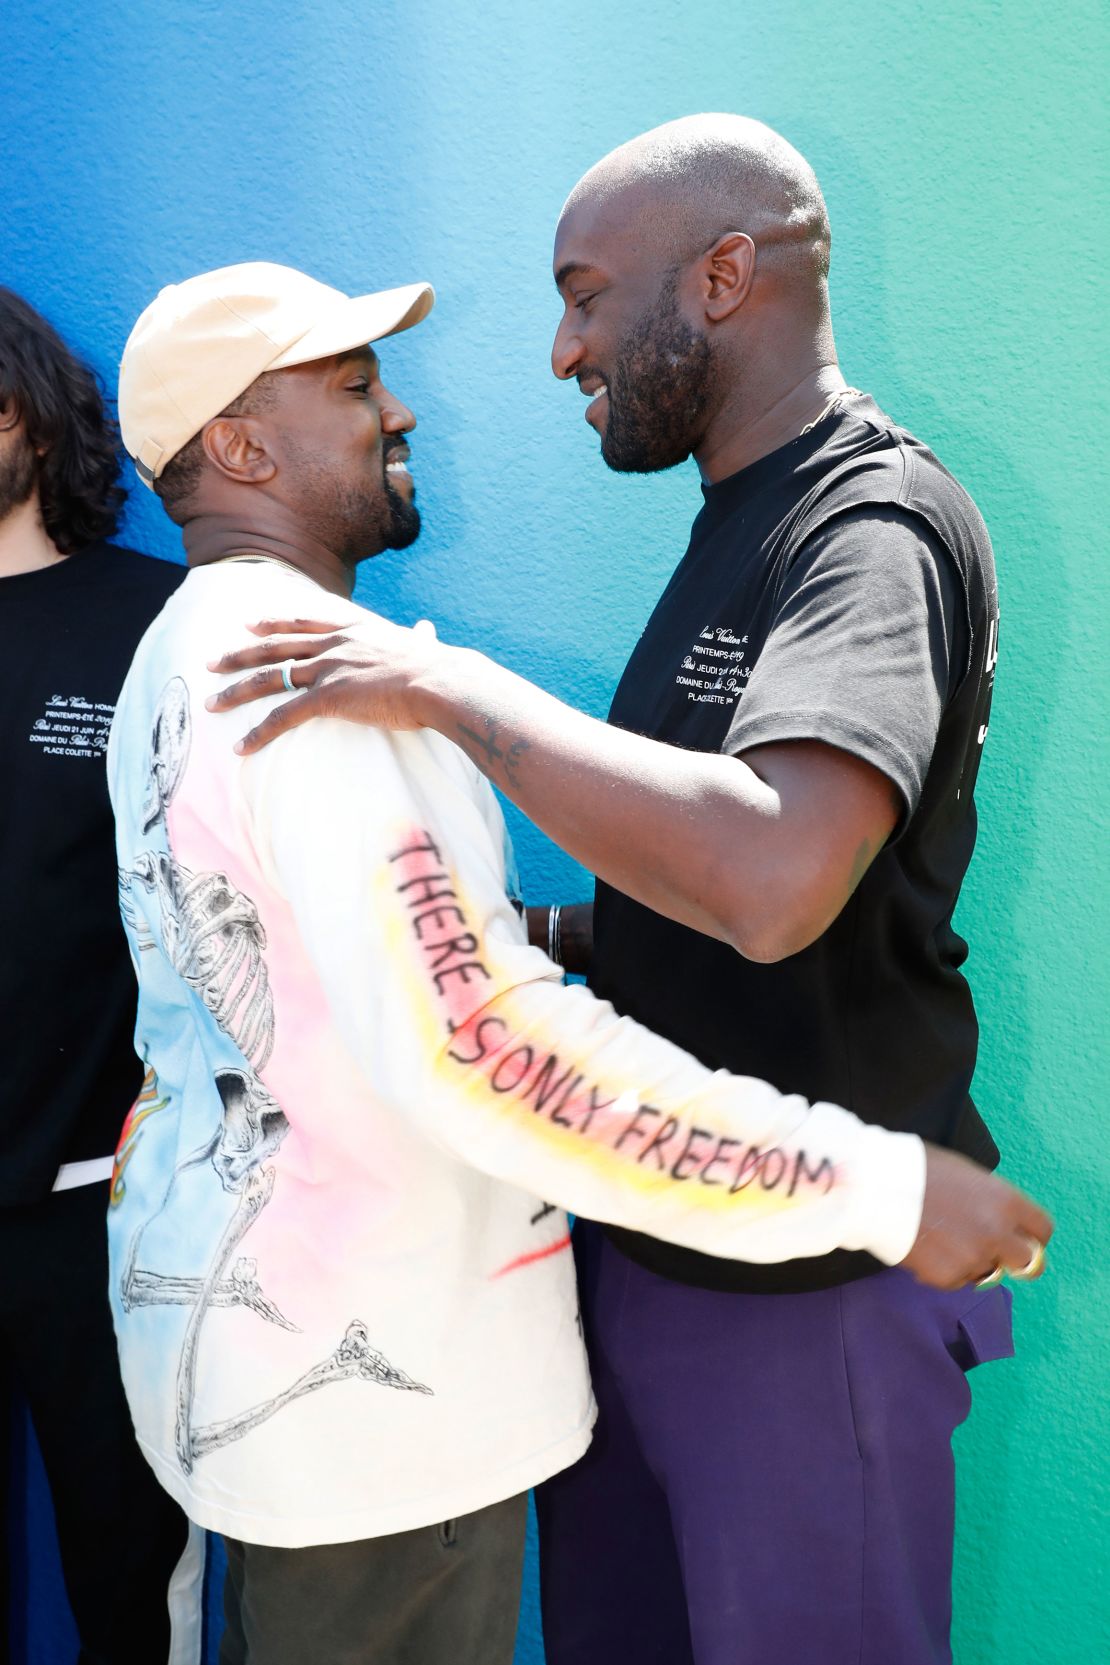 Who Is Virgil Abloh? 5 Things About Designer Who Died – Hollywood Life